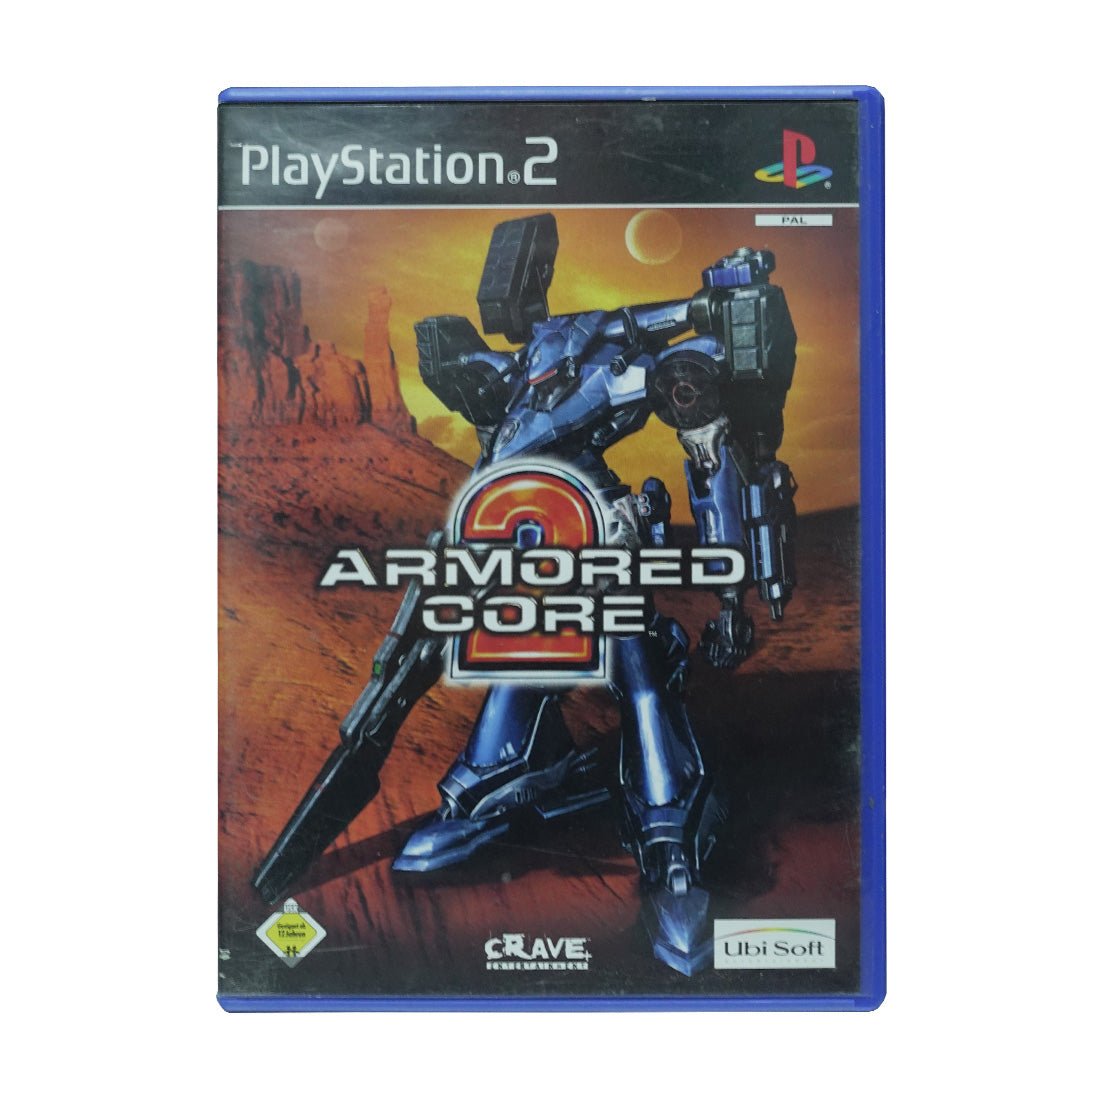 (Pre-Owned) Armored Core - PlayStation 2 - ريترو - Store 974 | ستور ٩٧٤